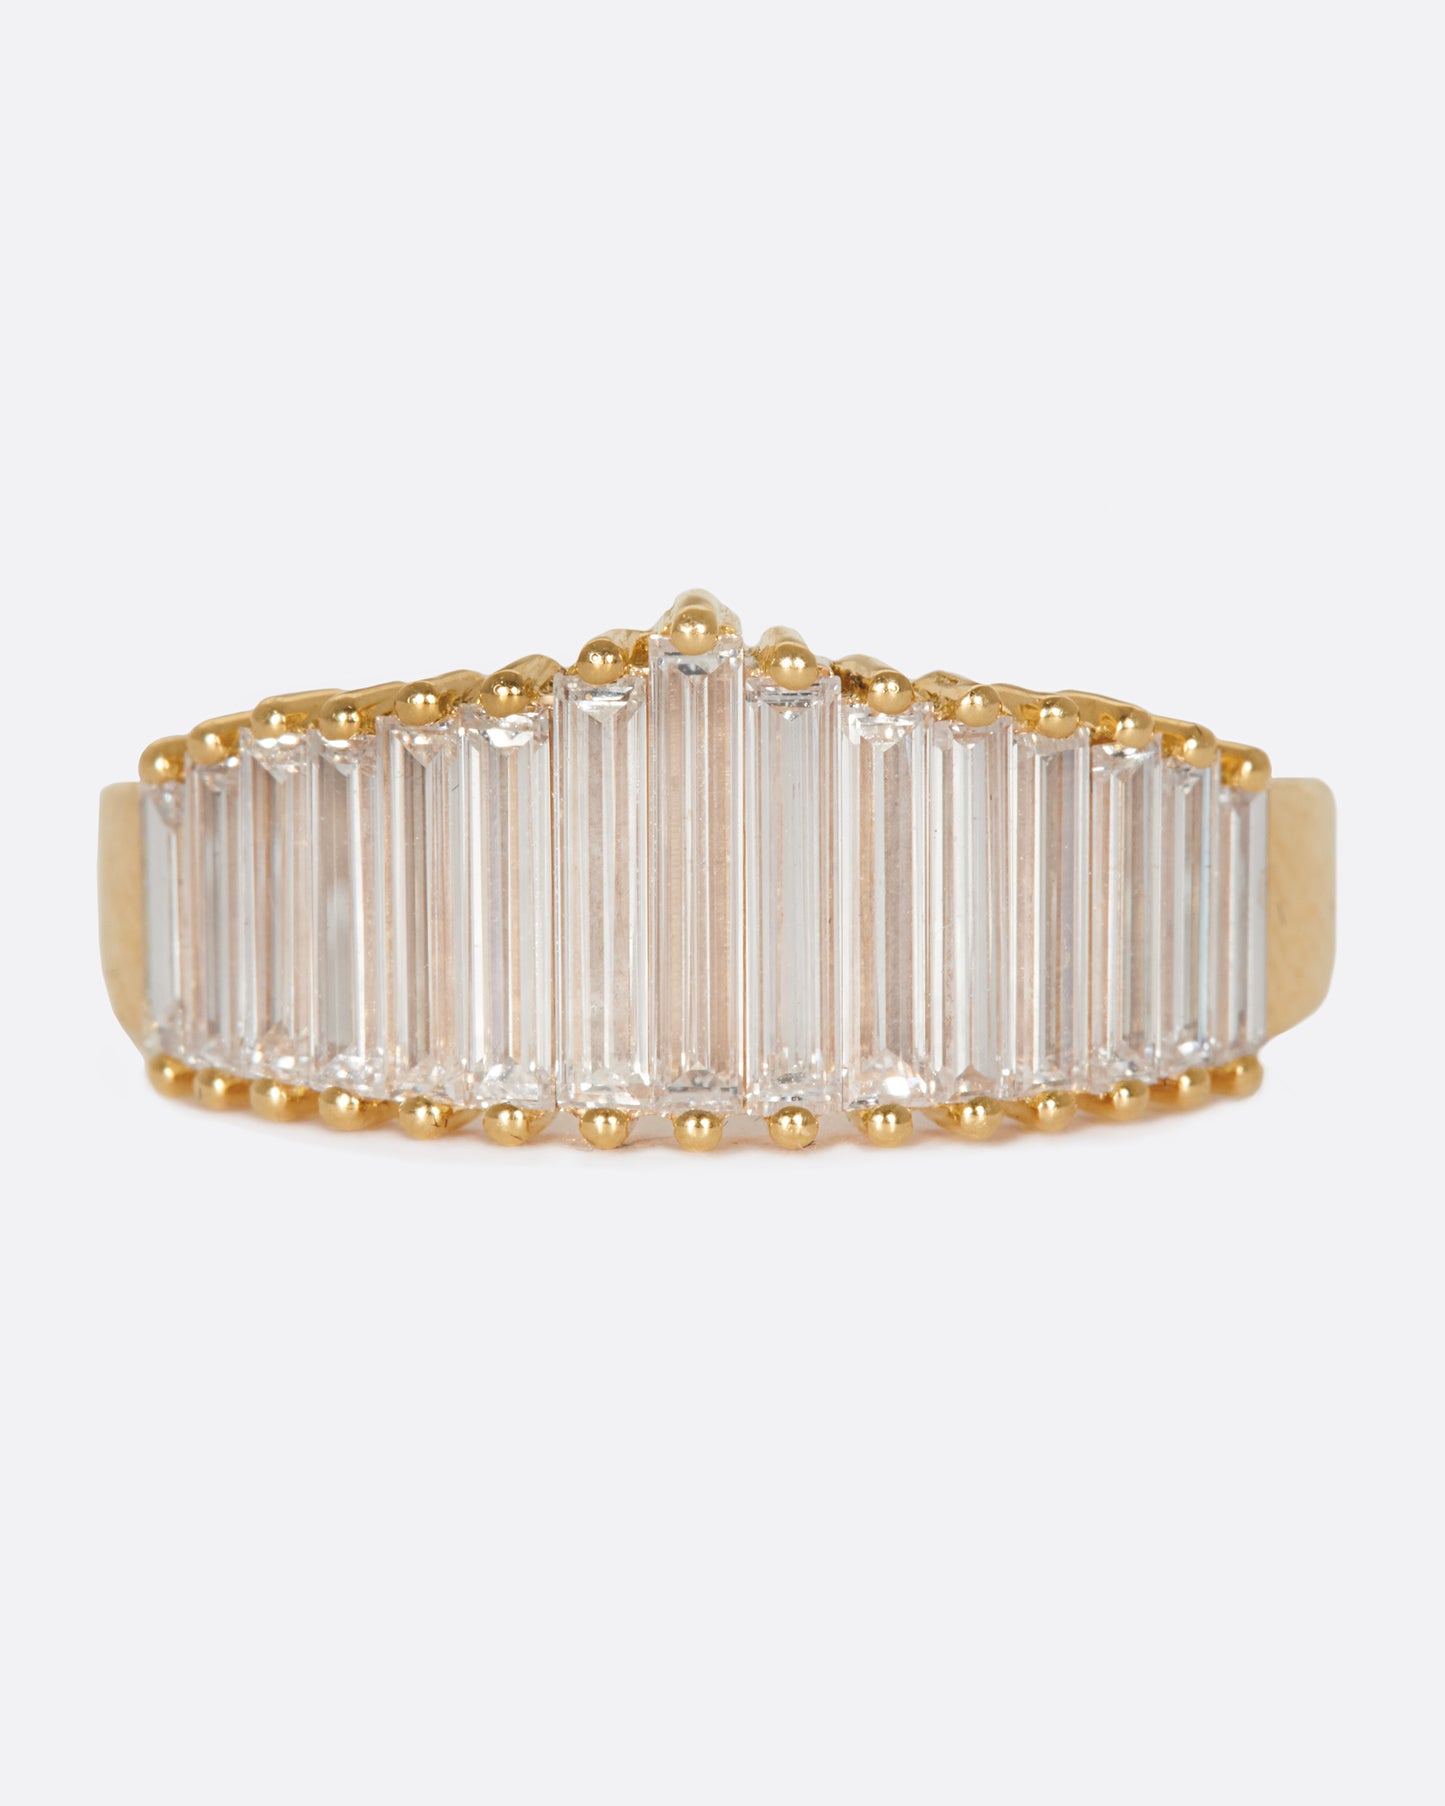 A wide crown ring of baguette diamonds, just as magnificent on its own as it is stacked.